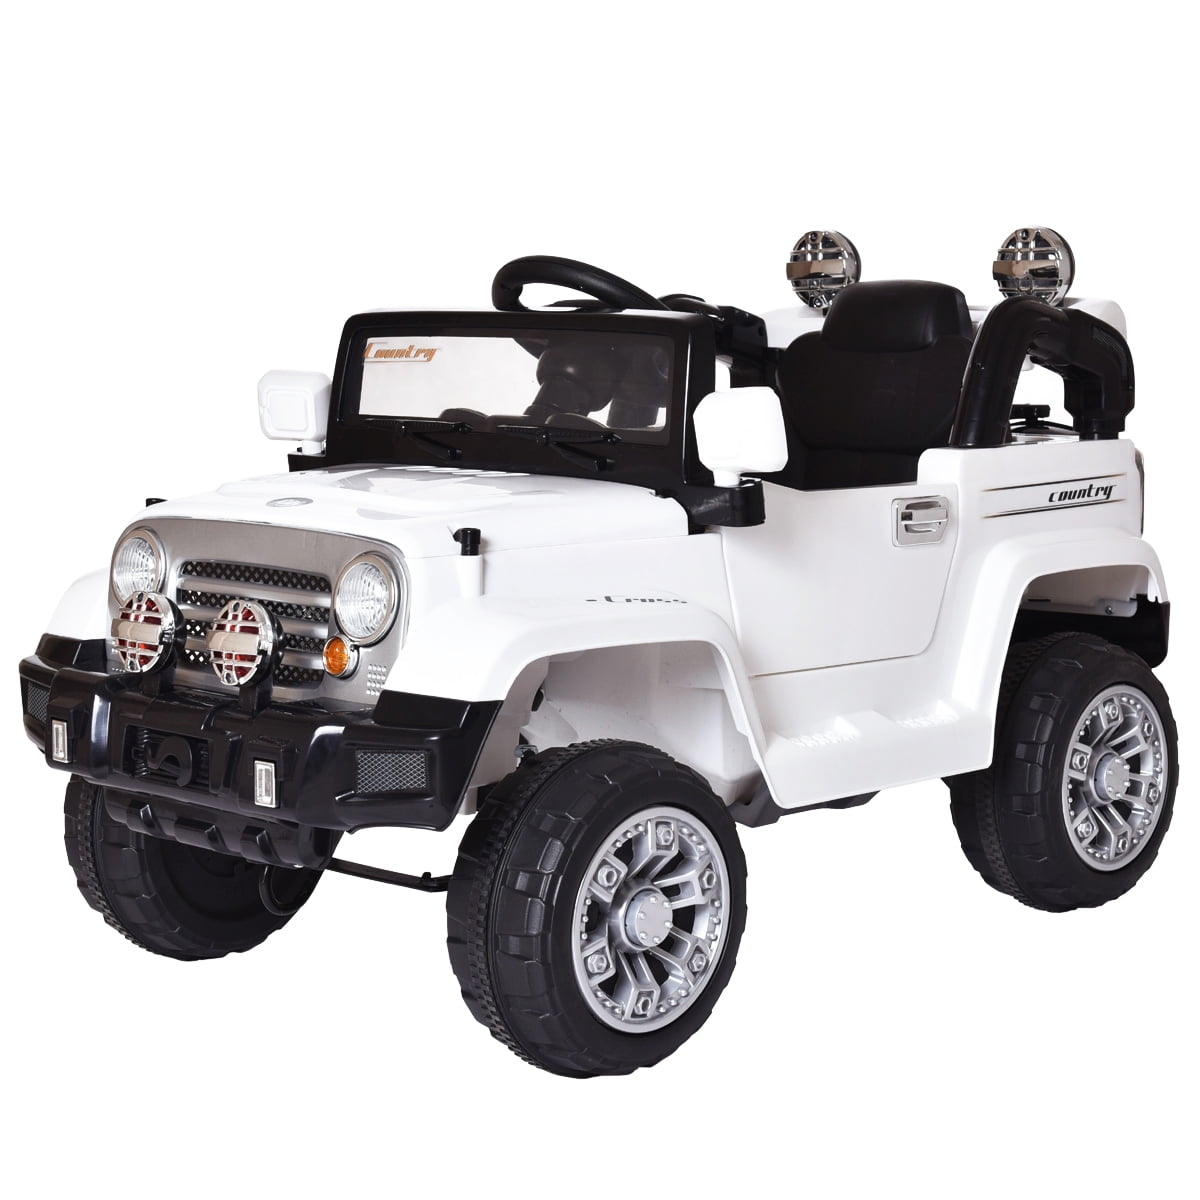 12V Jeep style Kids Ride on Truck Battery Powered Electric Car W/Remote Control 